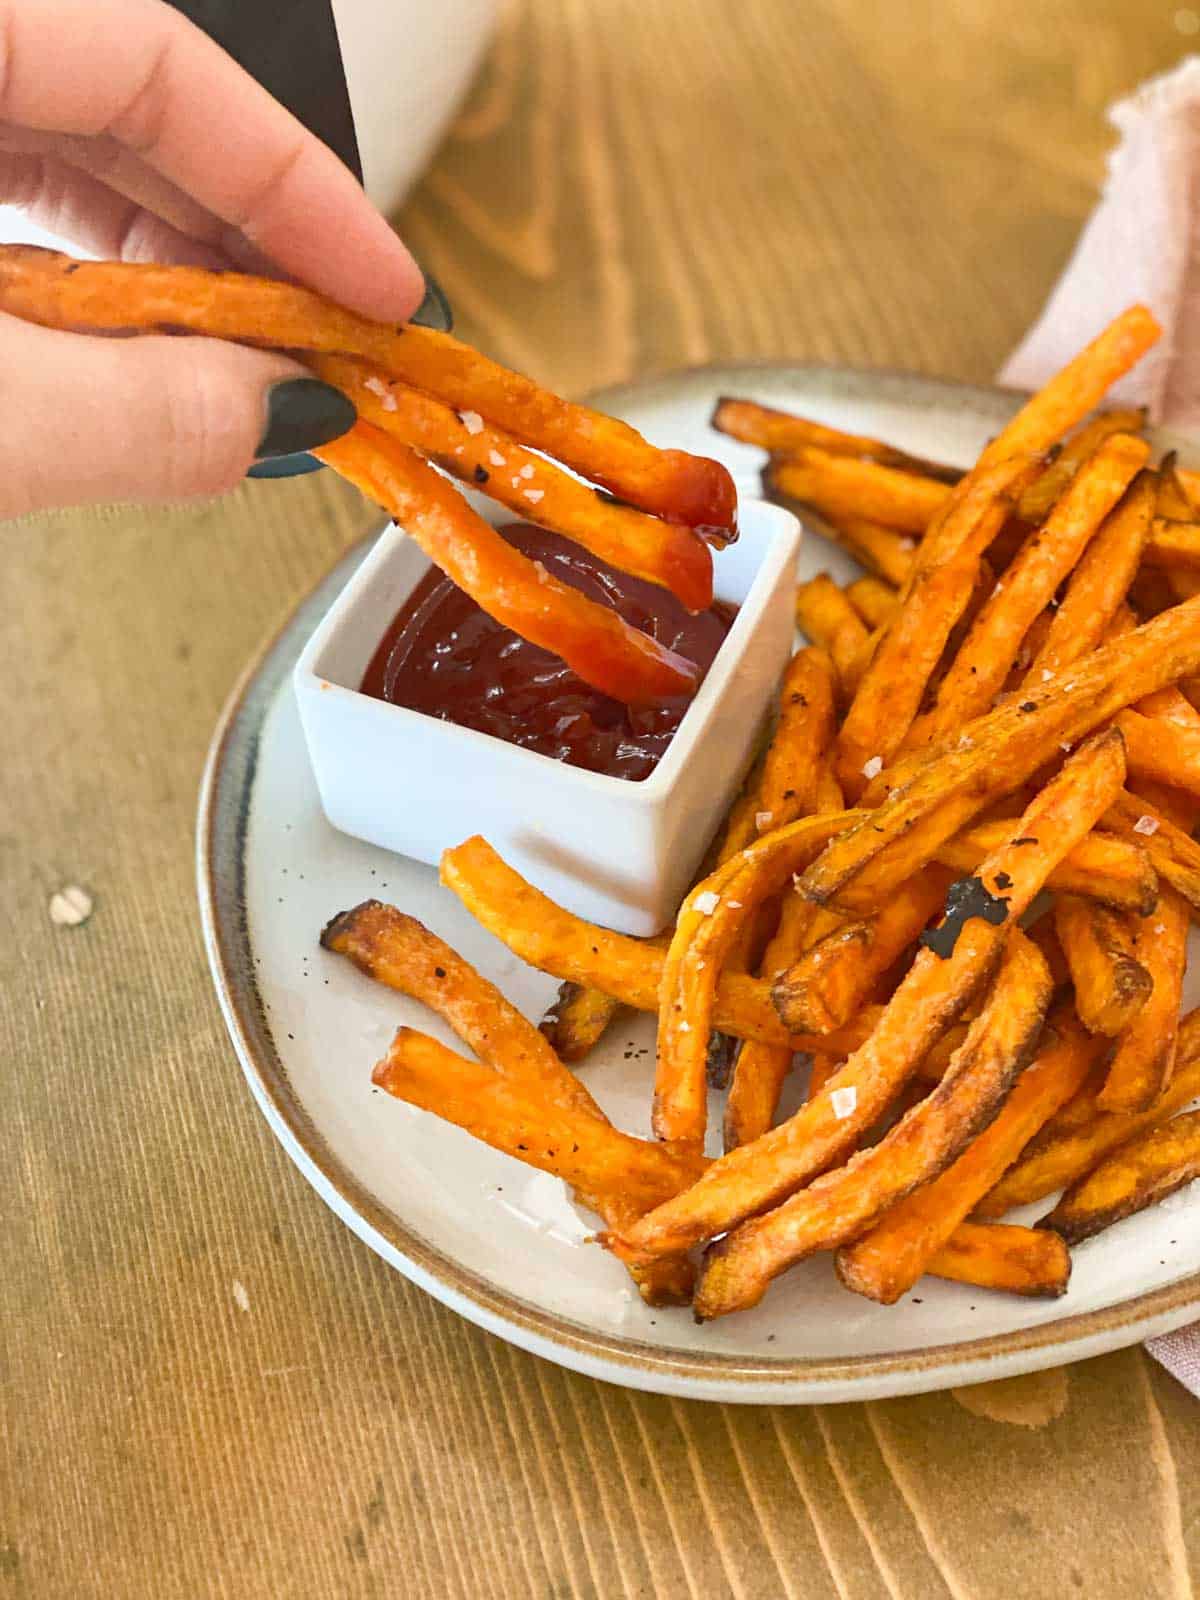 https://www.thisvivaciouslife.com/wp-content/uploads/2022/03/Frozen-Sweet-Potato-Fries-in-Air-Fryer-dipped-in-ketchup.jpg